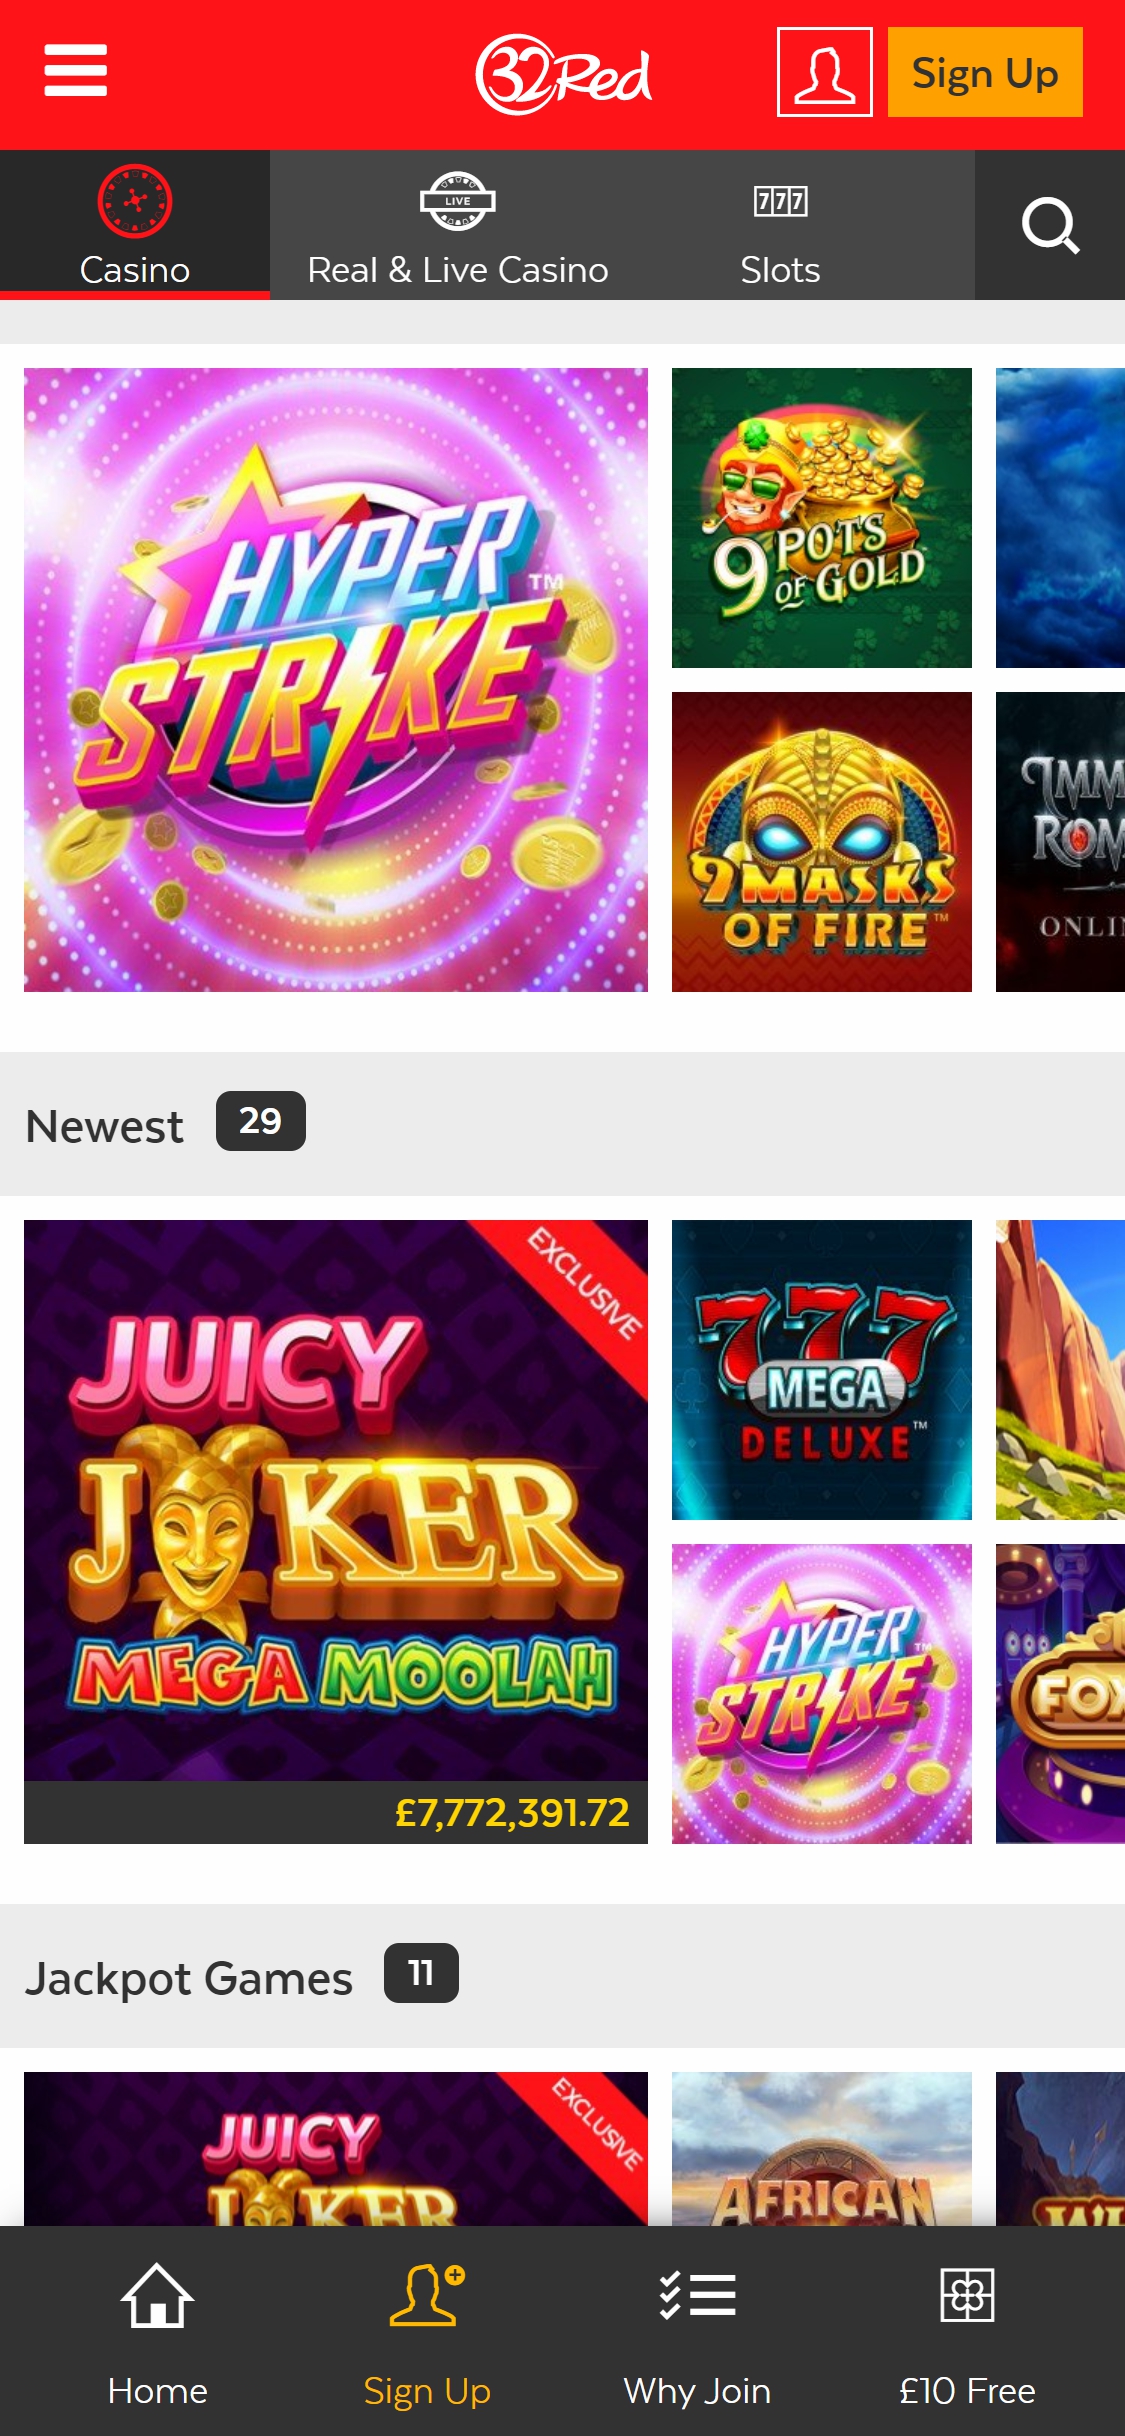 32 Red Casino Mobile Games Review